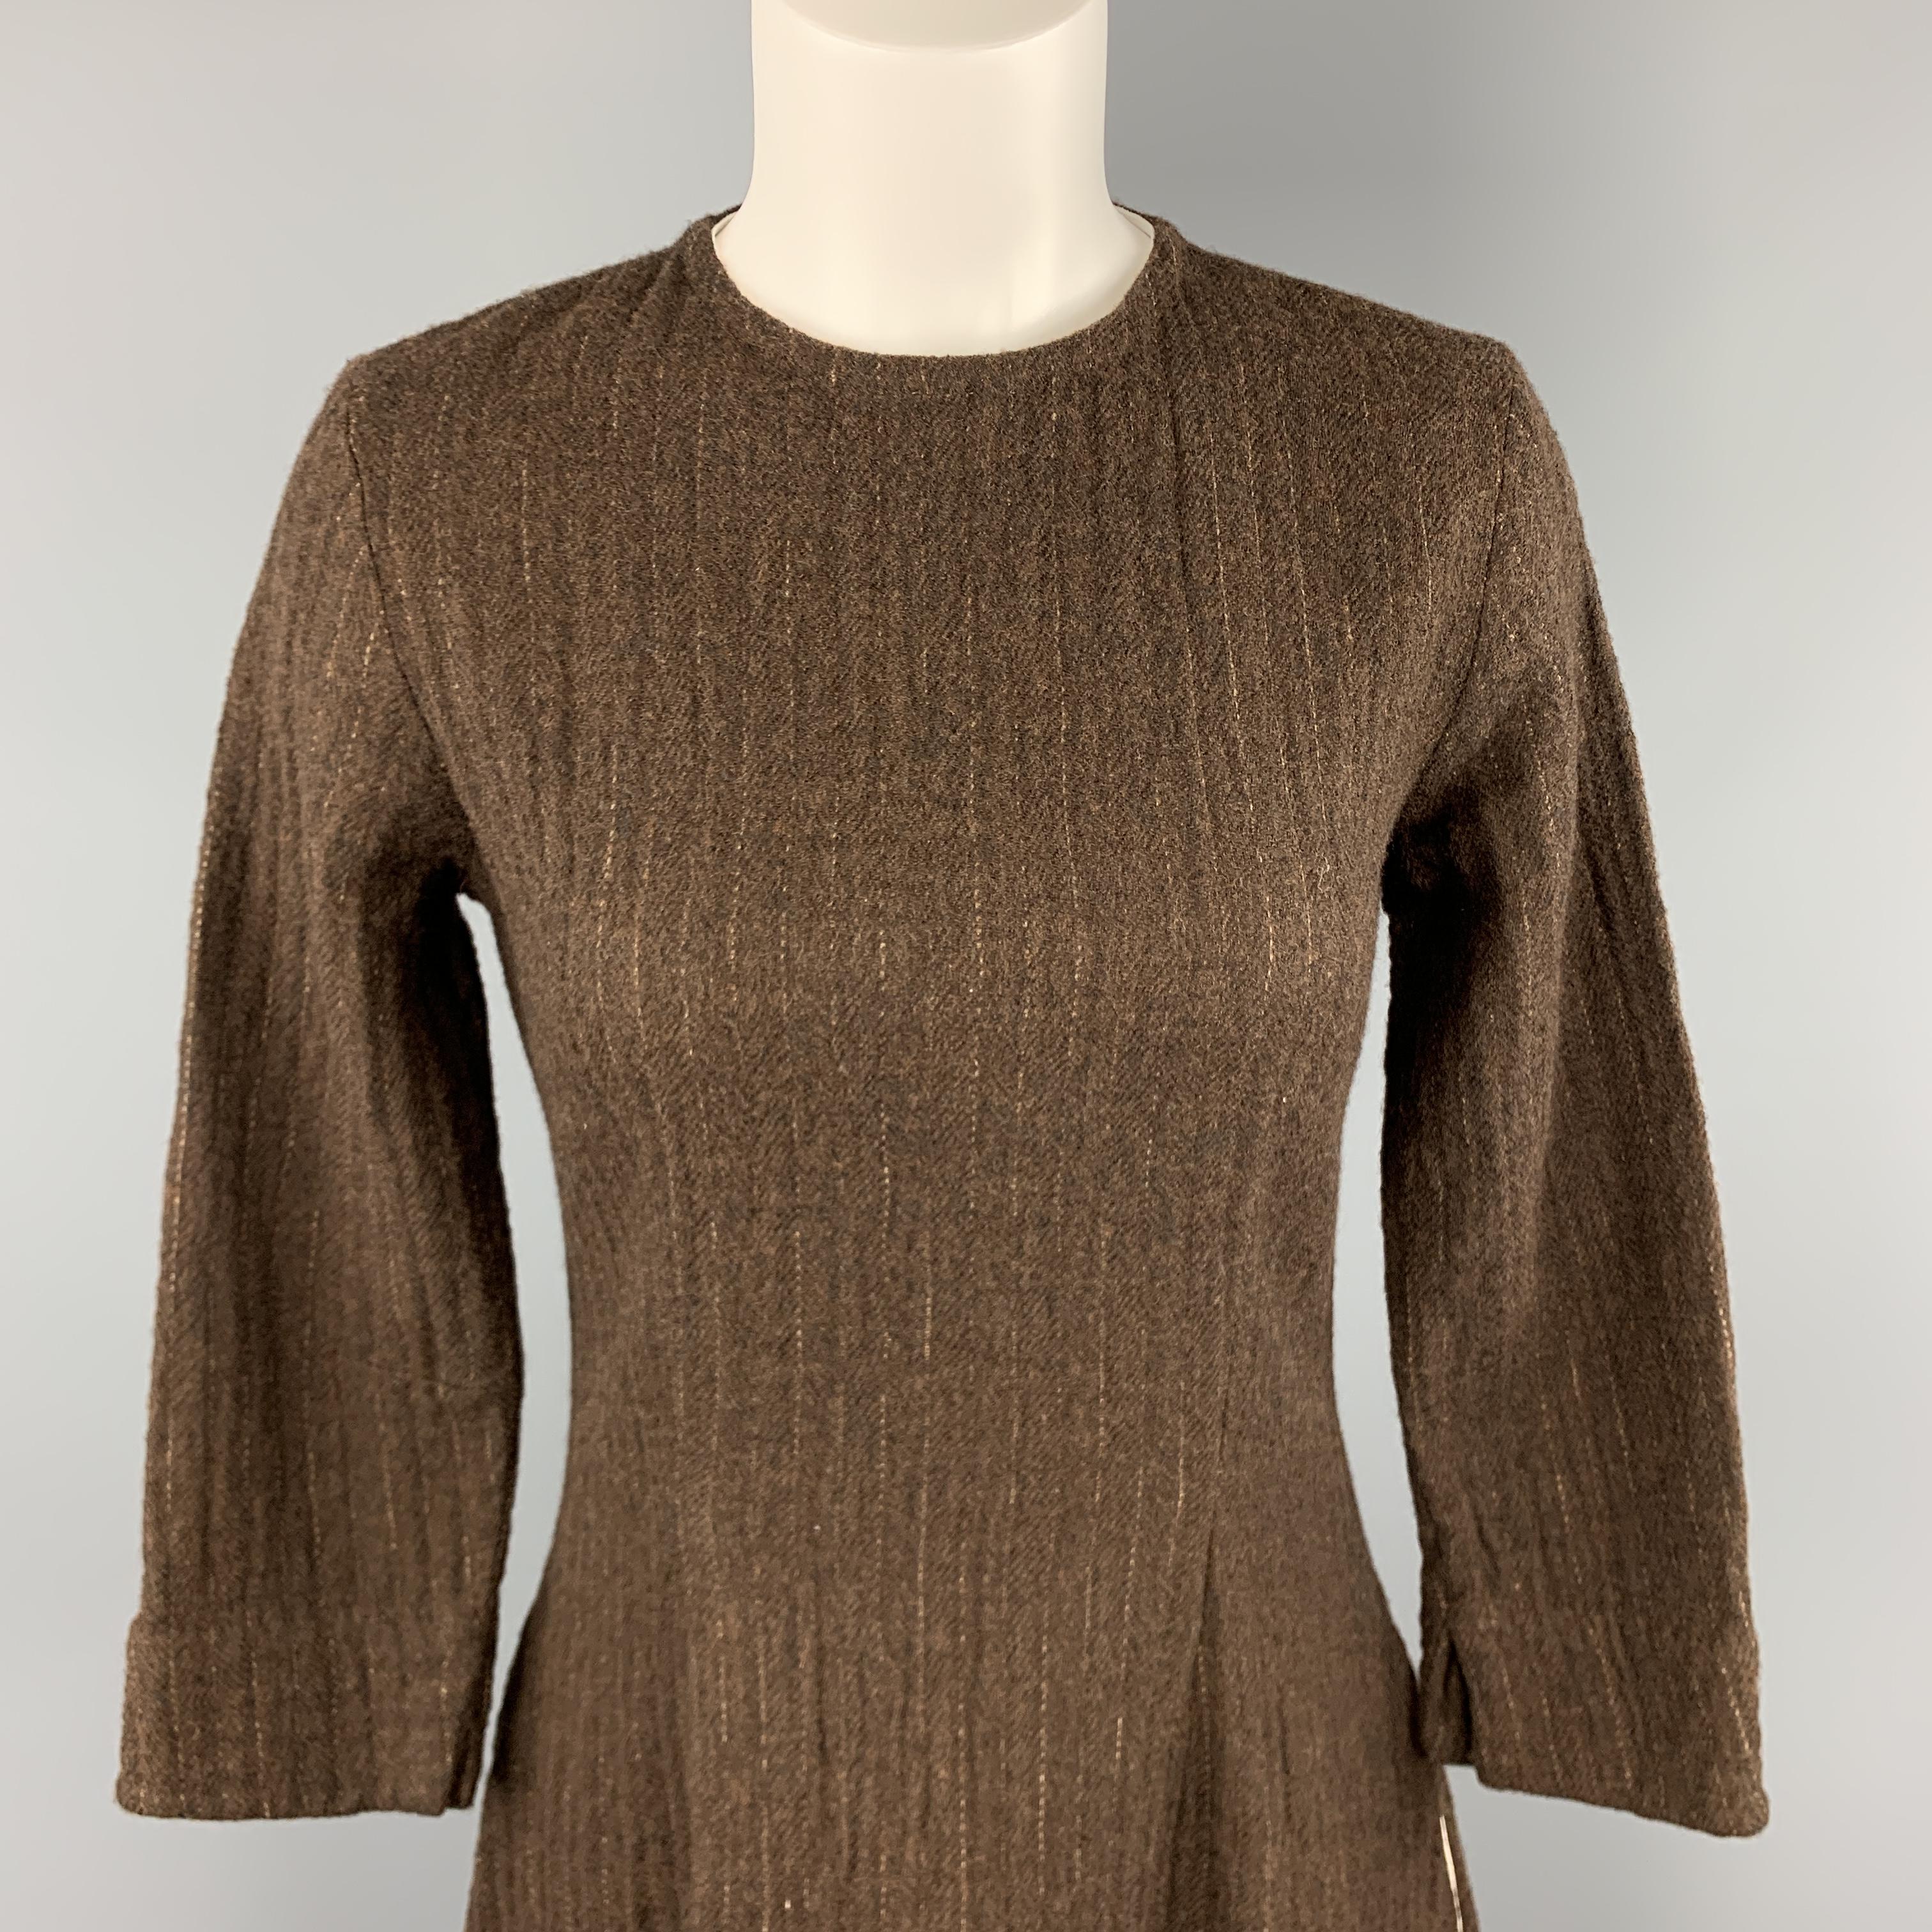 HAZEL BROWN shift dress comes in a brown textured knit with a round neck, long sleeves, and A line skirt. Made in USA.

Excellent Pre-Owned Condition.
Marked: 2

Measurements:

Shoulder: 15 in.
Bust: 36 in.
Waist: 29 in.
Hip: 44 in.
Sleeve: 20